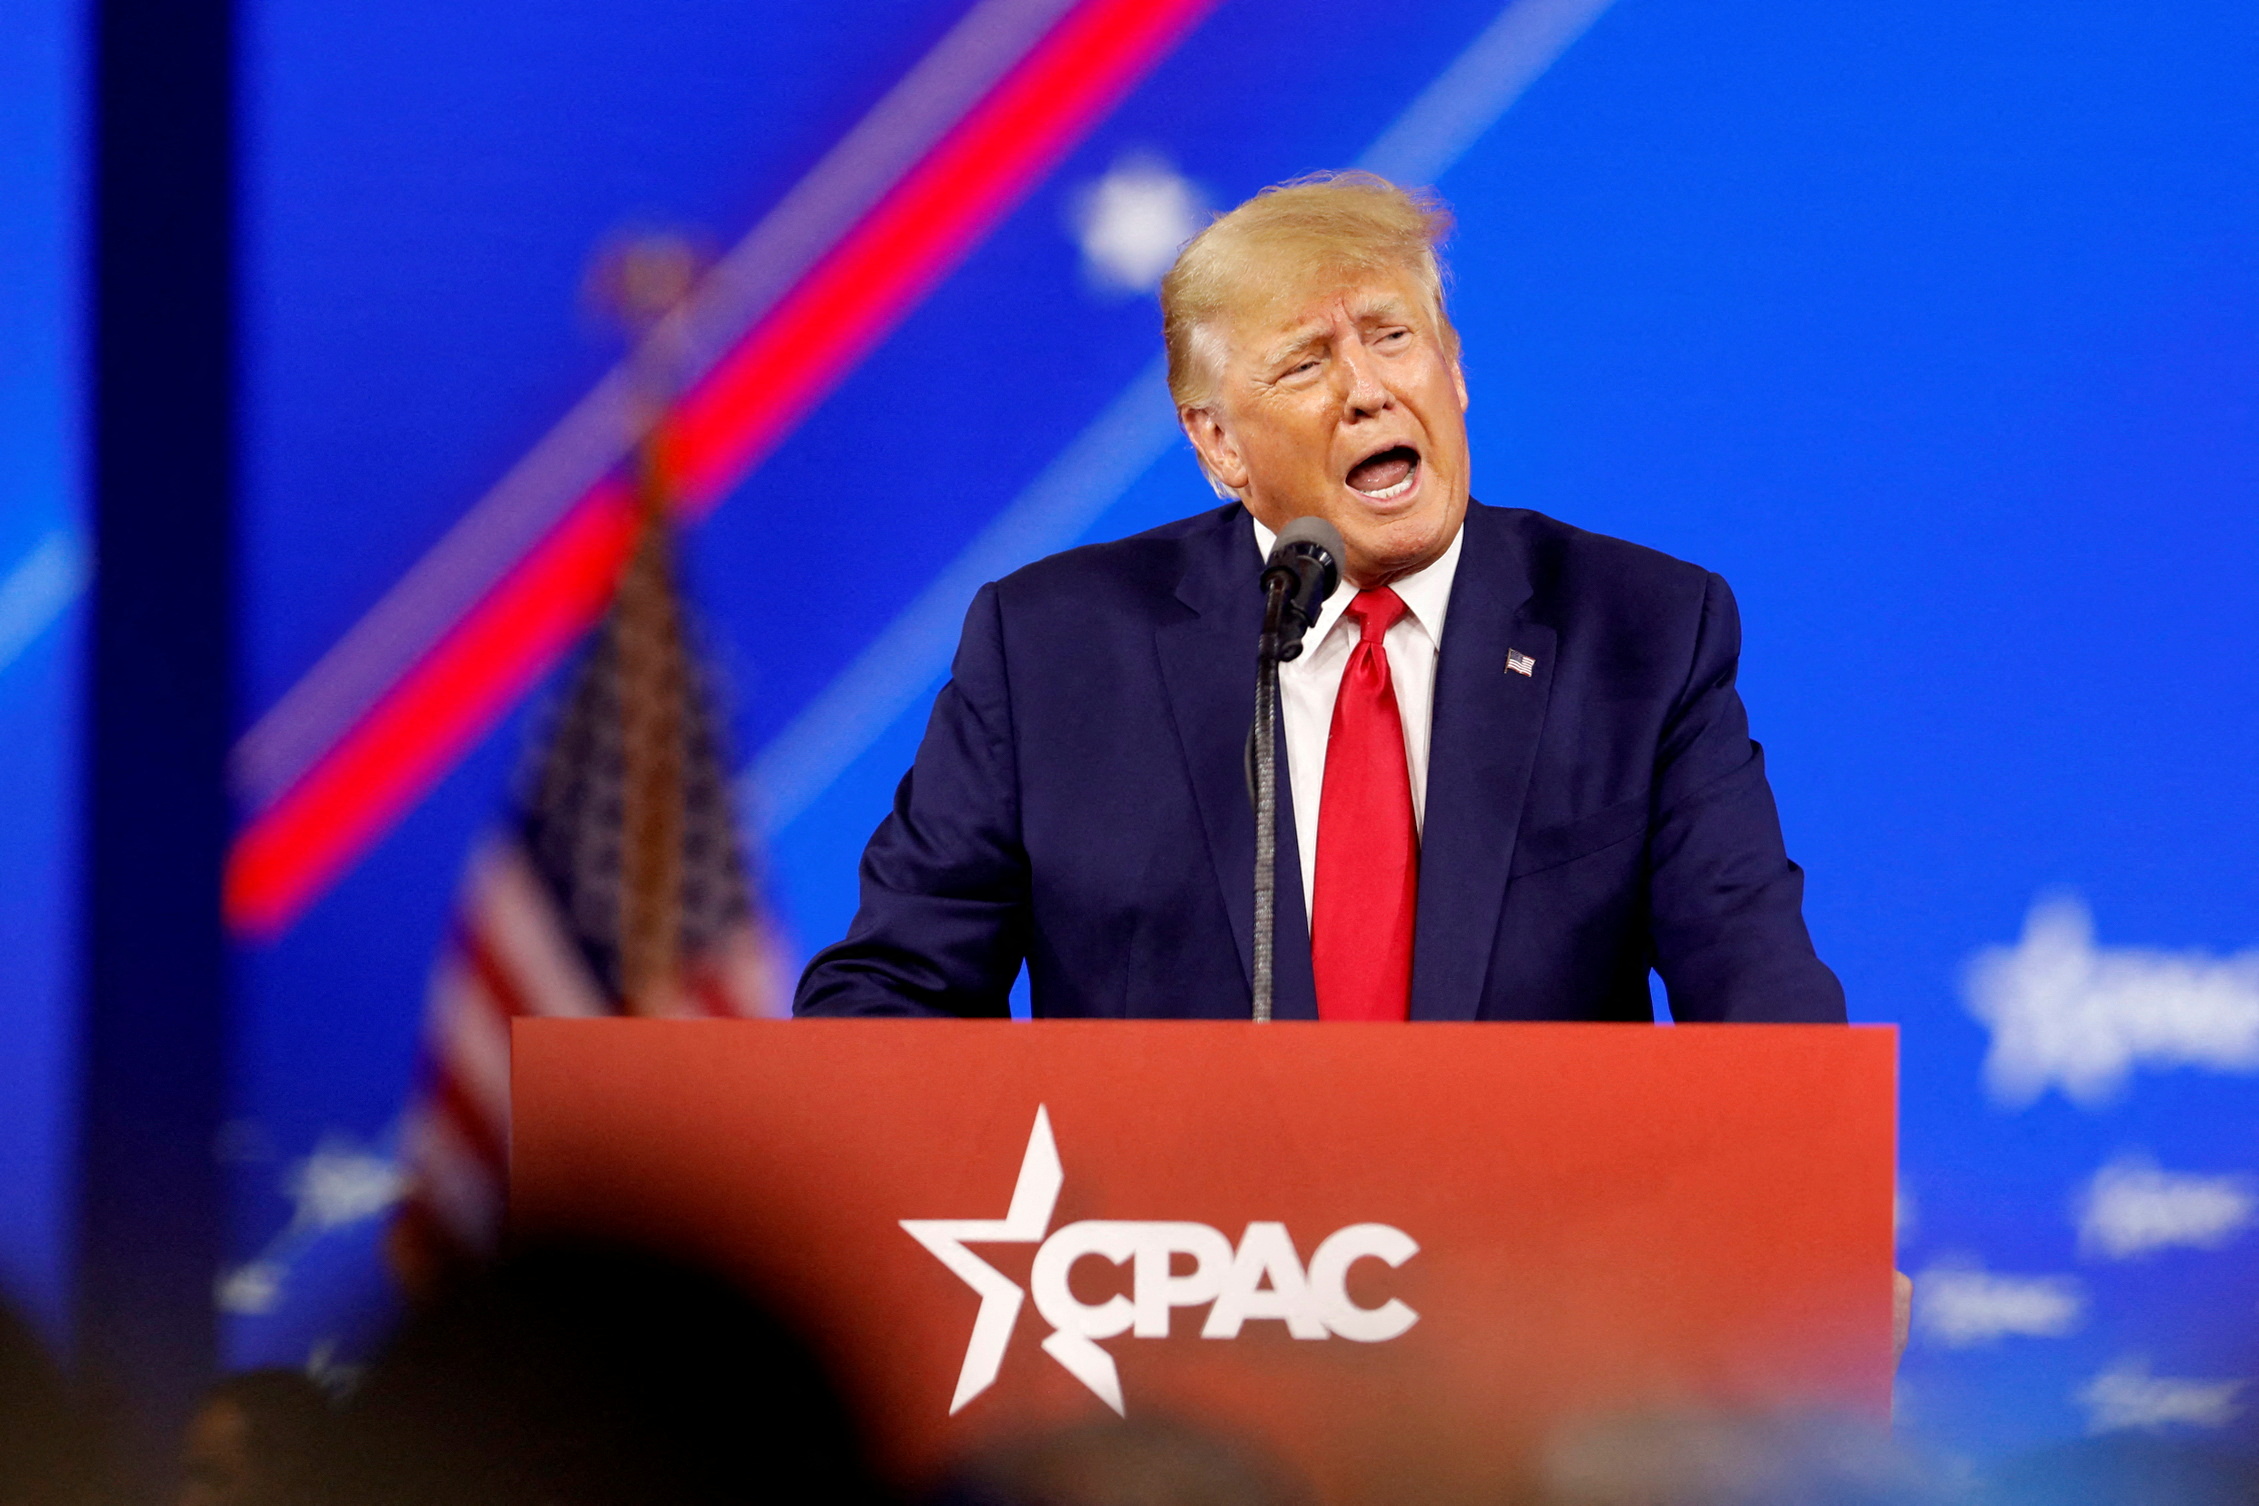 PHOTO: Former President Donald Trump speaks during the Conservative Political Action Conference (CPAC) in Orlando, Fla., Feb. 26, 2022.